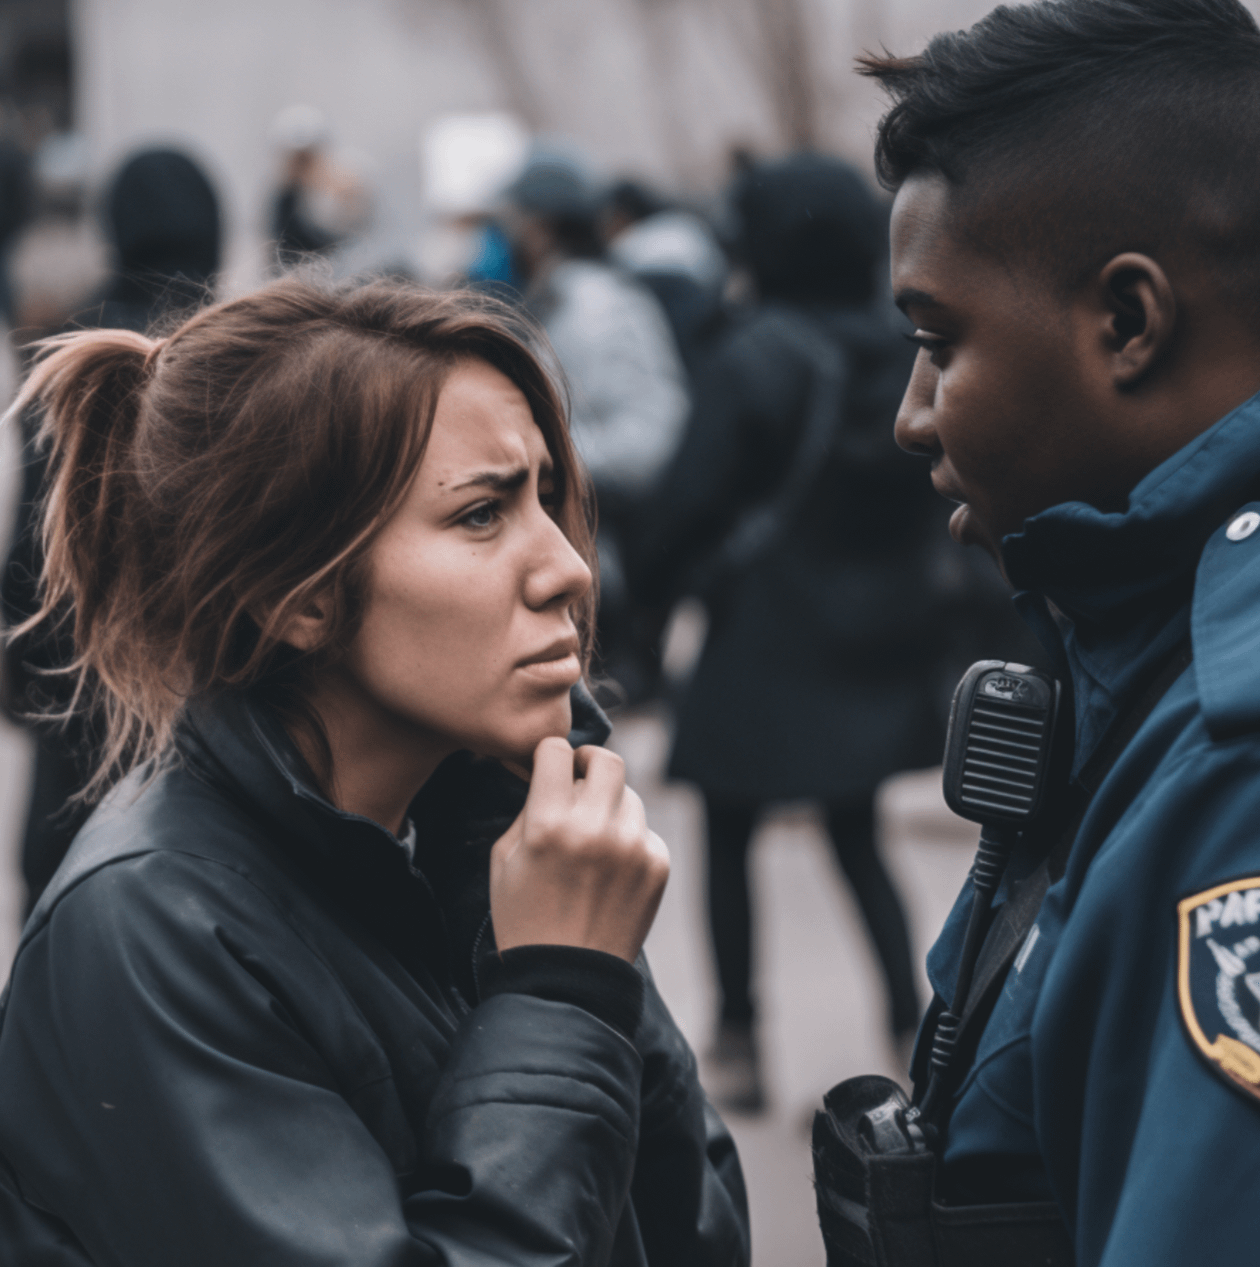 A woman in distress speaking to an officer